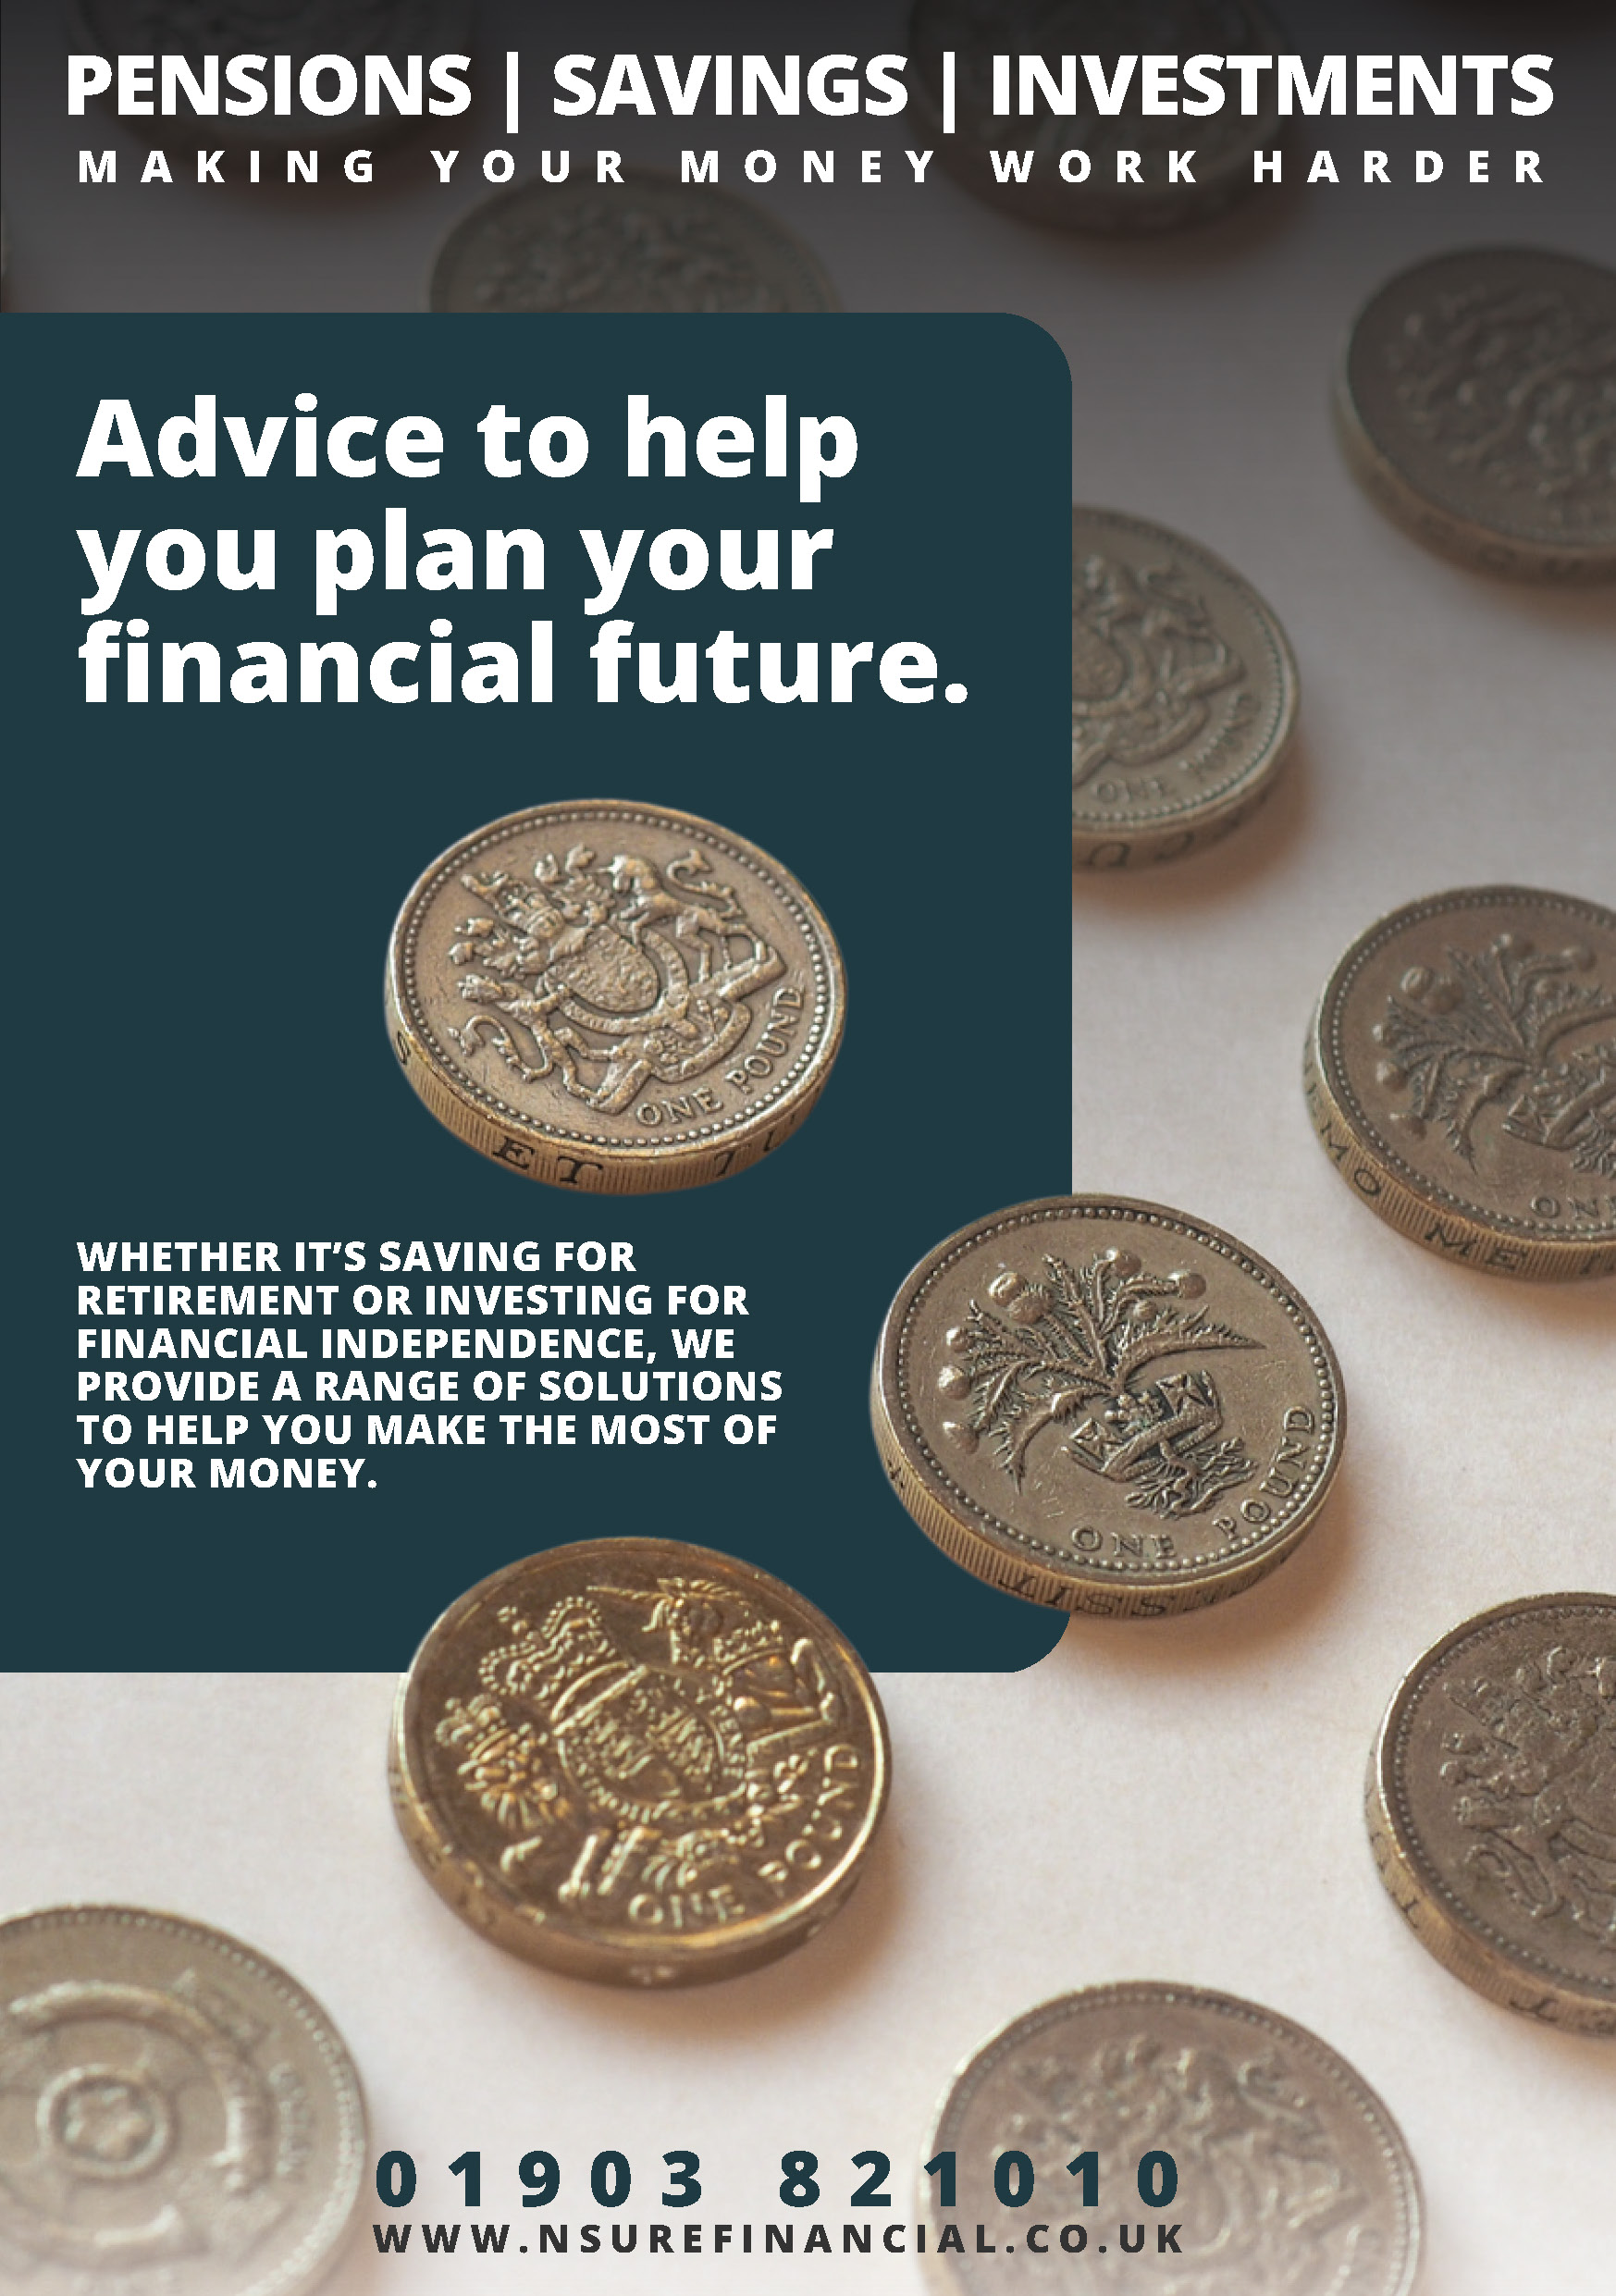 One pound coins on a background alluding to saving money. Text on advert says that Nsure Chartered Financial Planners can provide information about a range of solutions that will help.